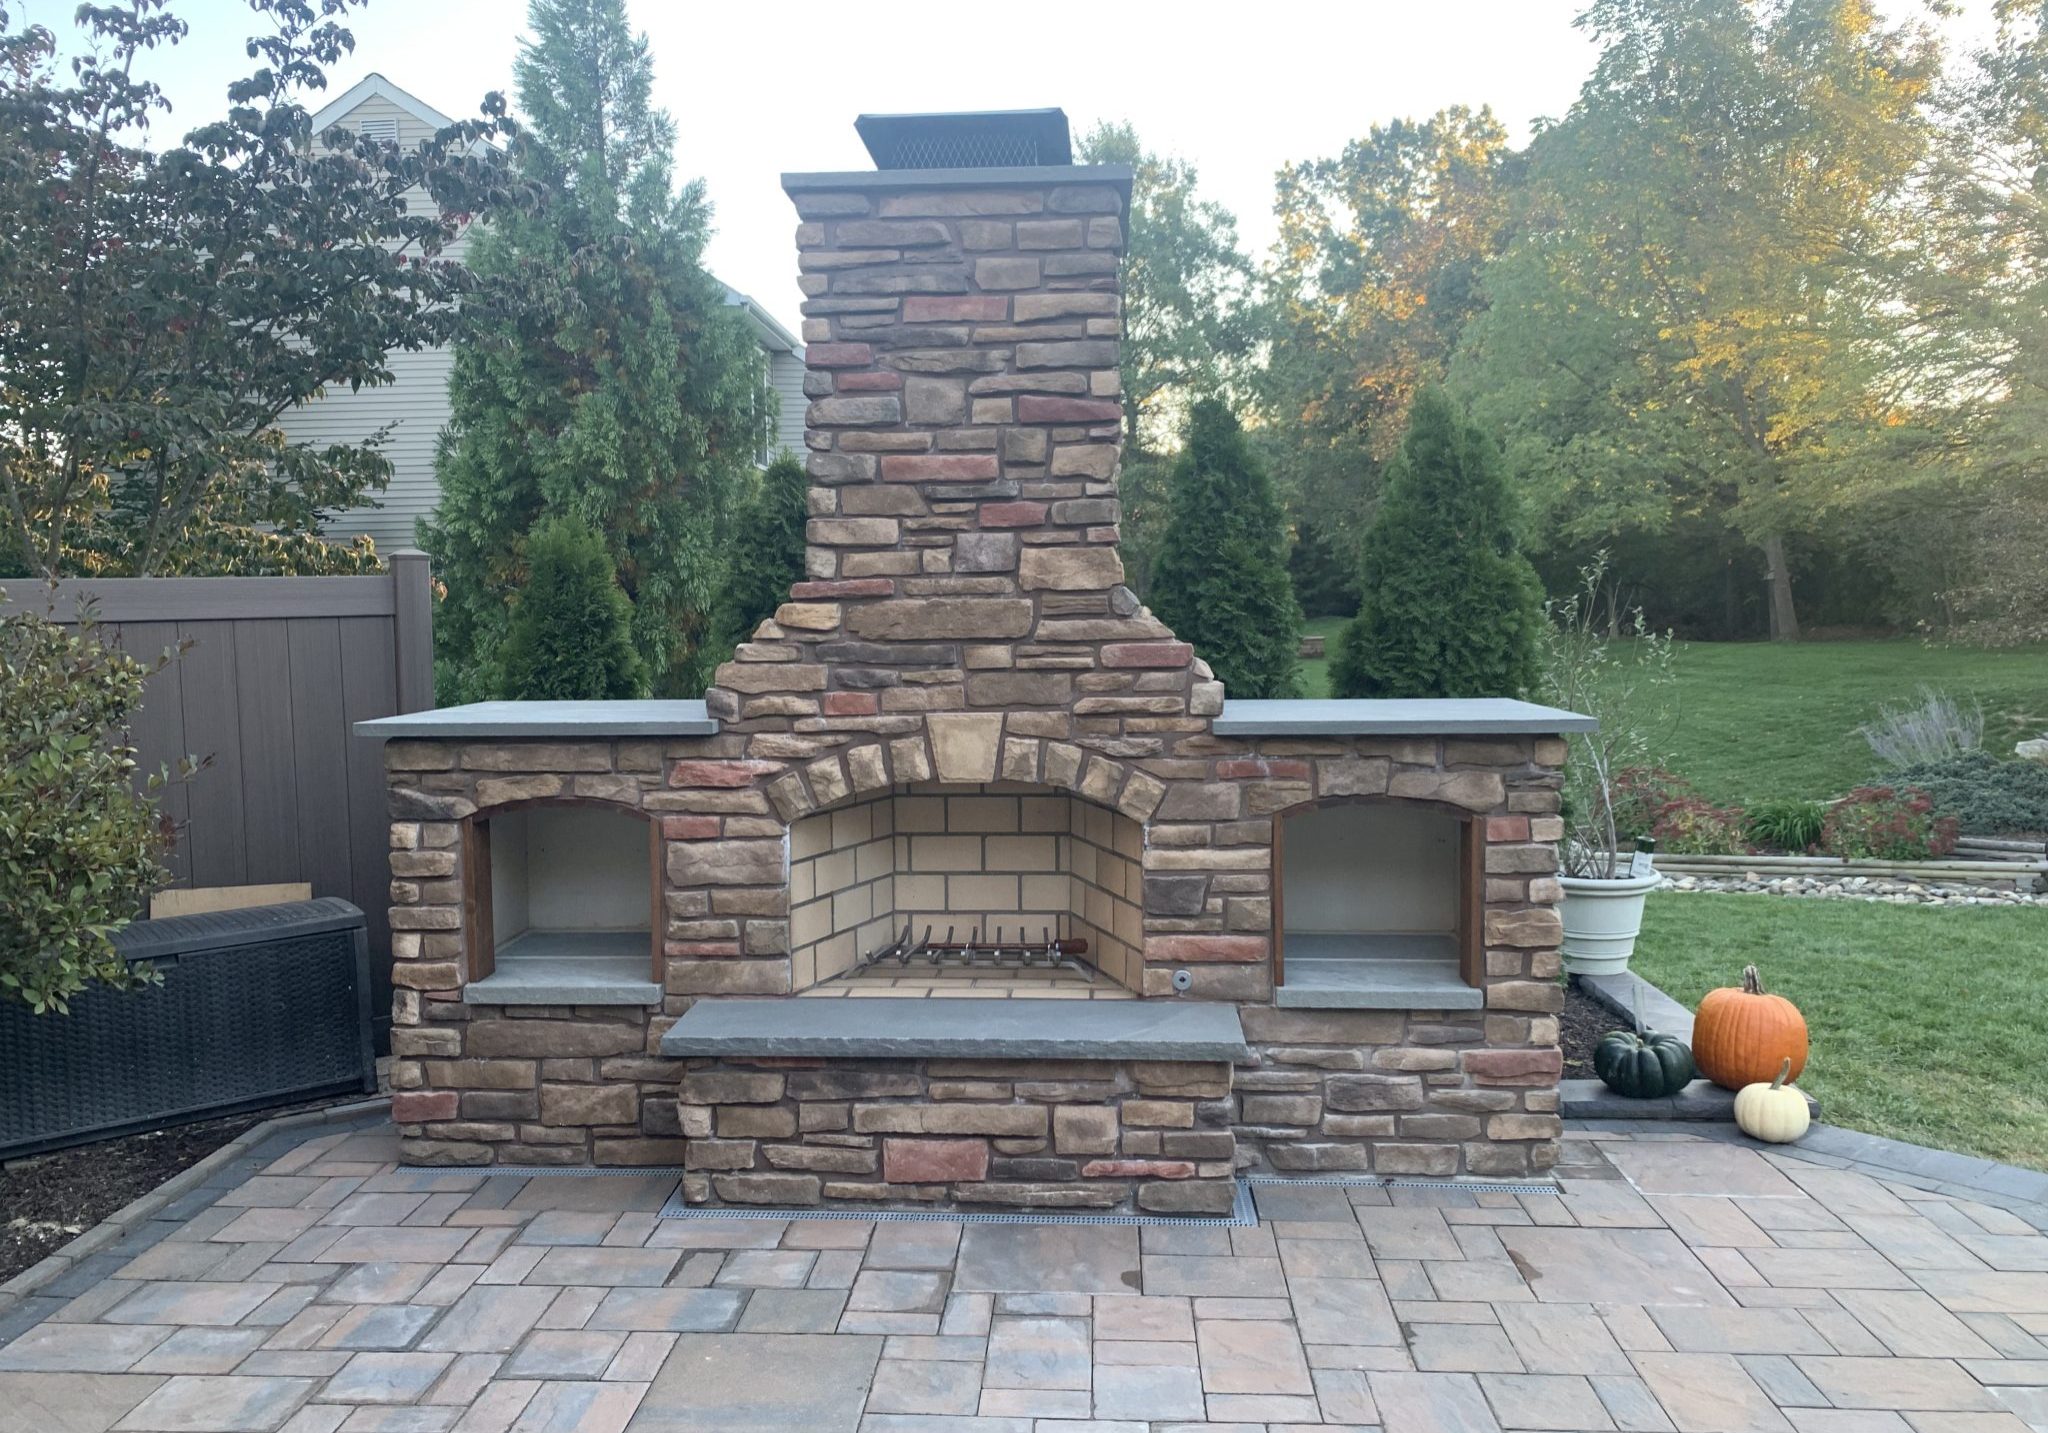 A larger, more permanent fire feature is a fireplace. This is a Mezzo fireplace on a patio.